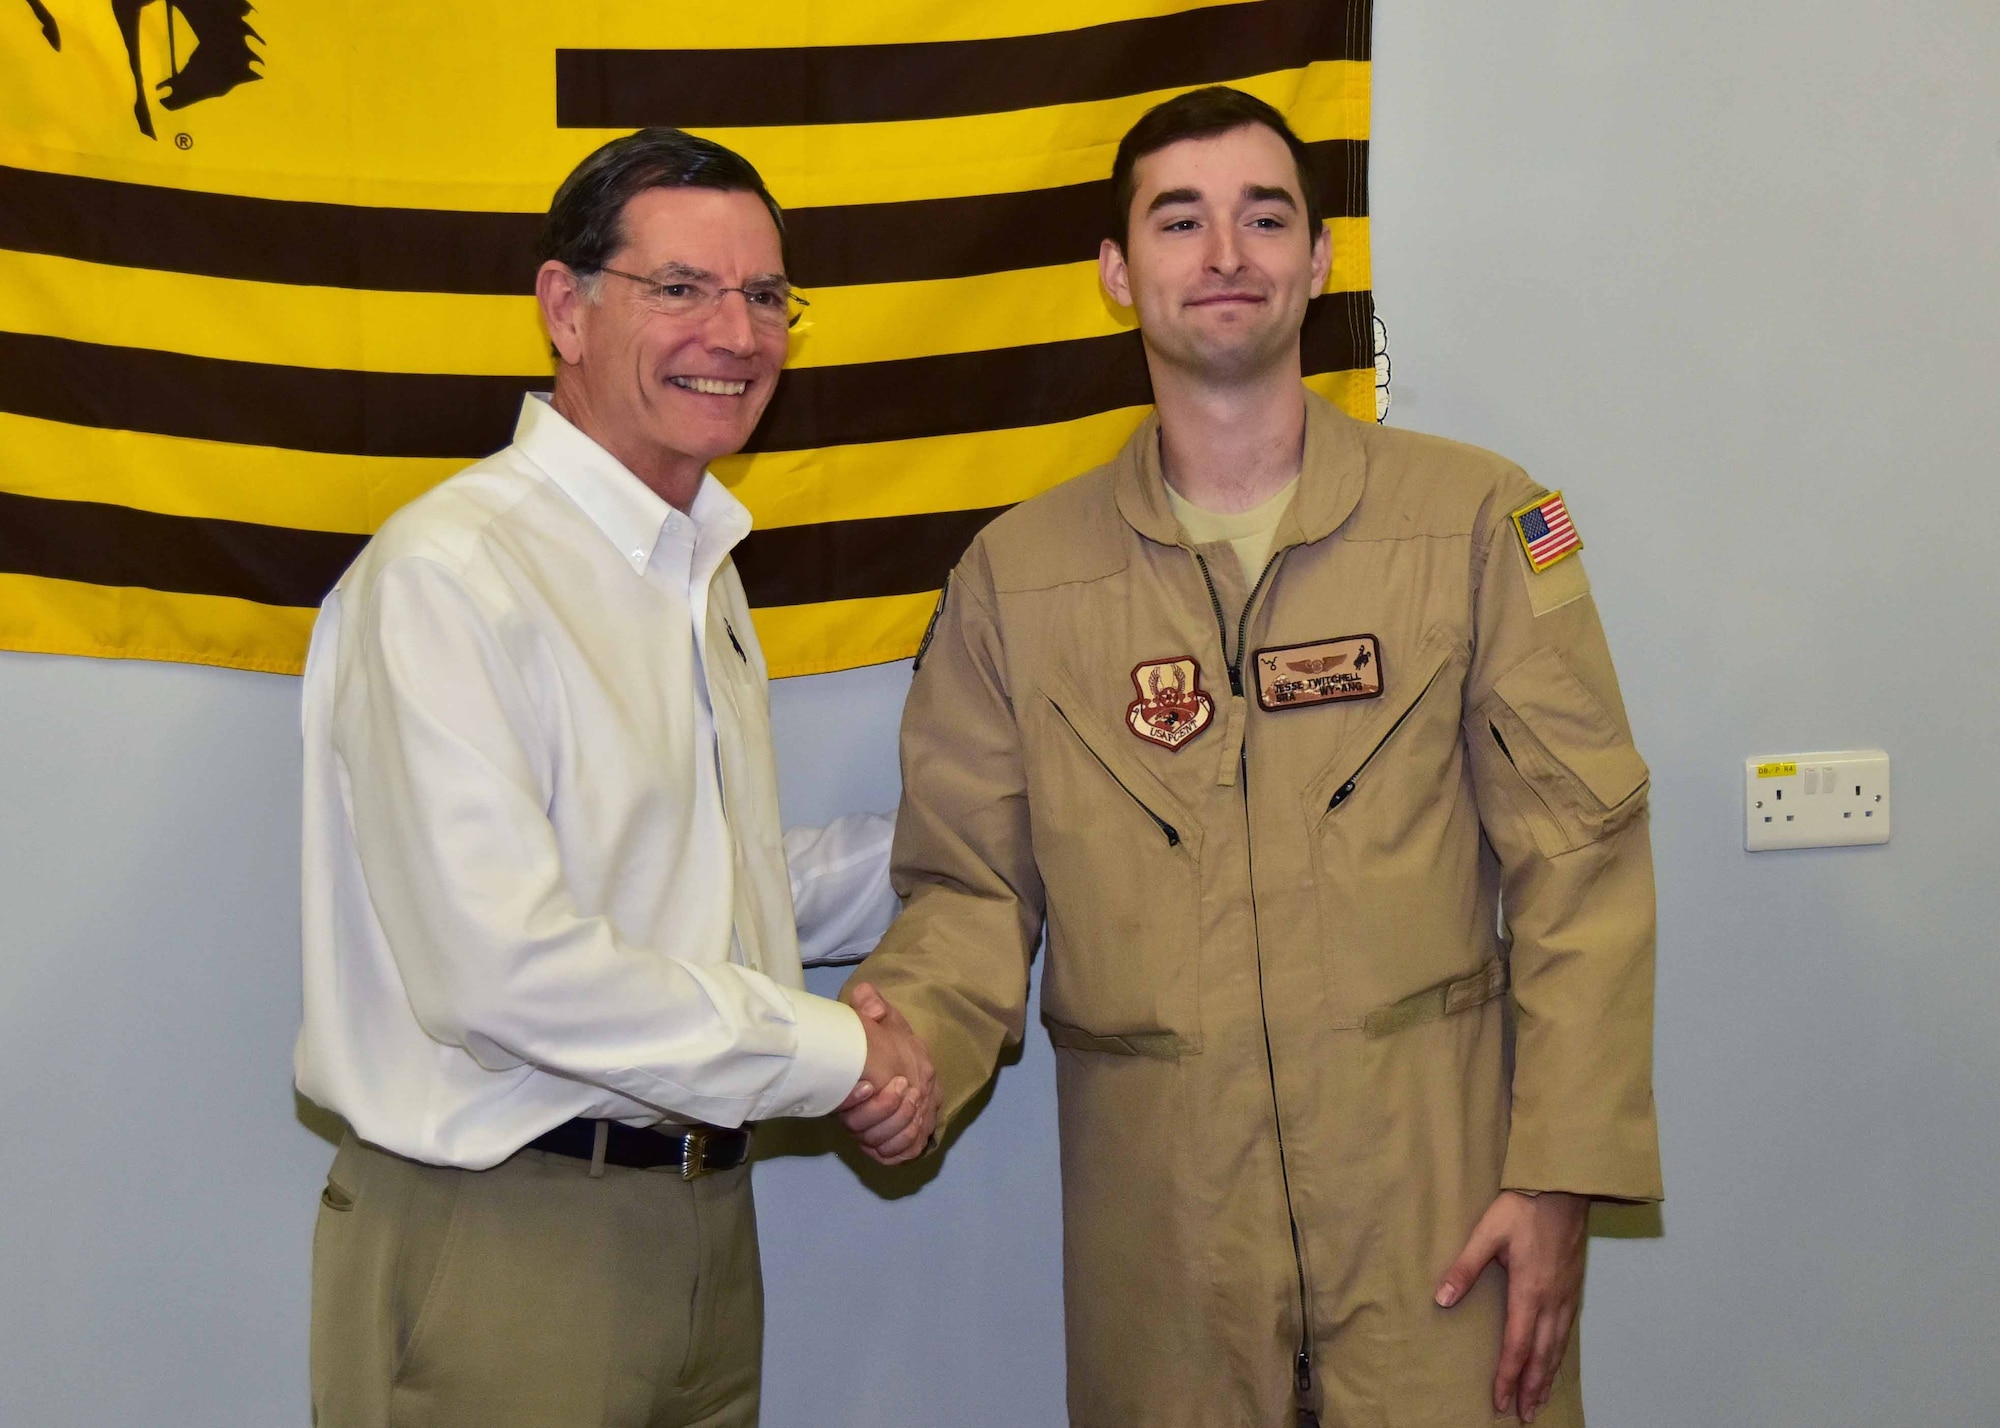 “The visit with Senator Barrasso was very productive [in regard] to updating him on the impact we are having on the mission of the 386th Air Expeditionary Wing,” said Lt. Col. Todd Davis, 737th EAS director of operations. “More importantly, he was provided information on how our deployed members from the Wyoming ANG have been supporting the 386th Expeditionary Operations Group and 386th Expeditionary Maintenance Group since we arrived to our deployed location.”